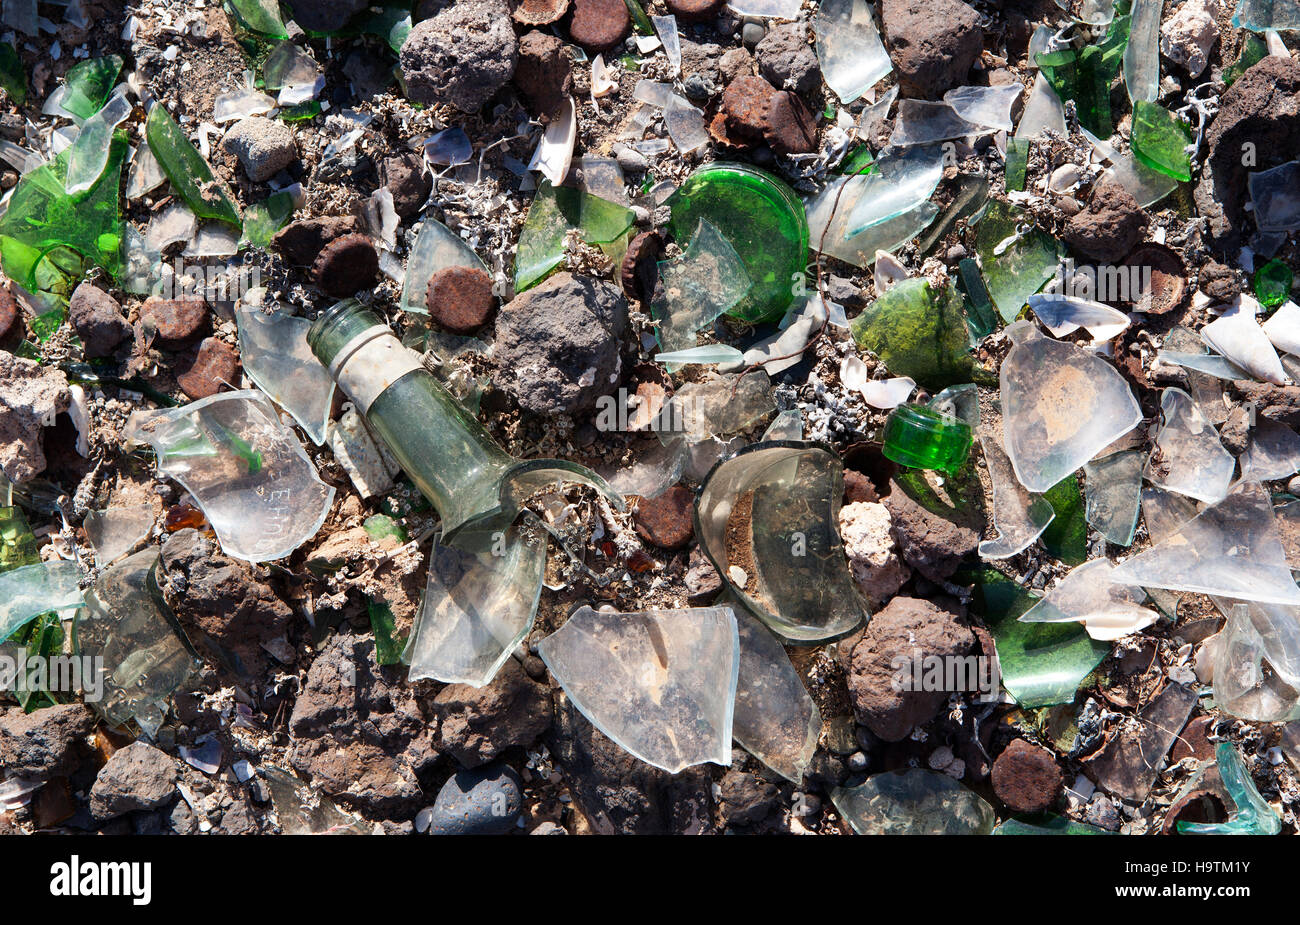 Broken glass and metal parts at a dump, Fuerteventura, Canary Islands, Spain Stock Photo